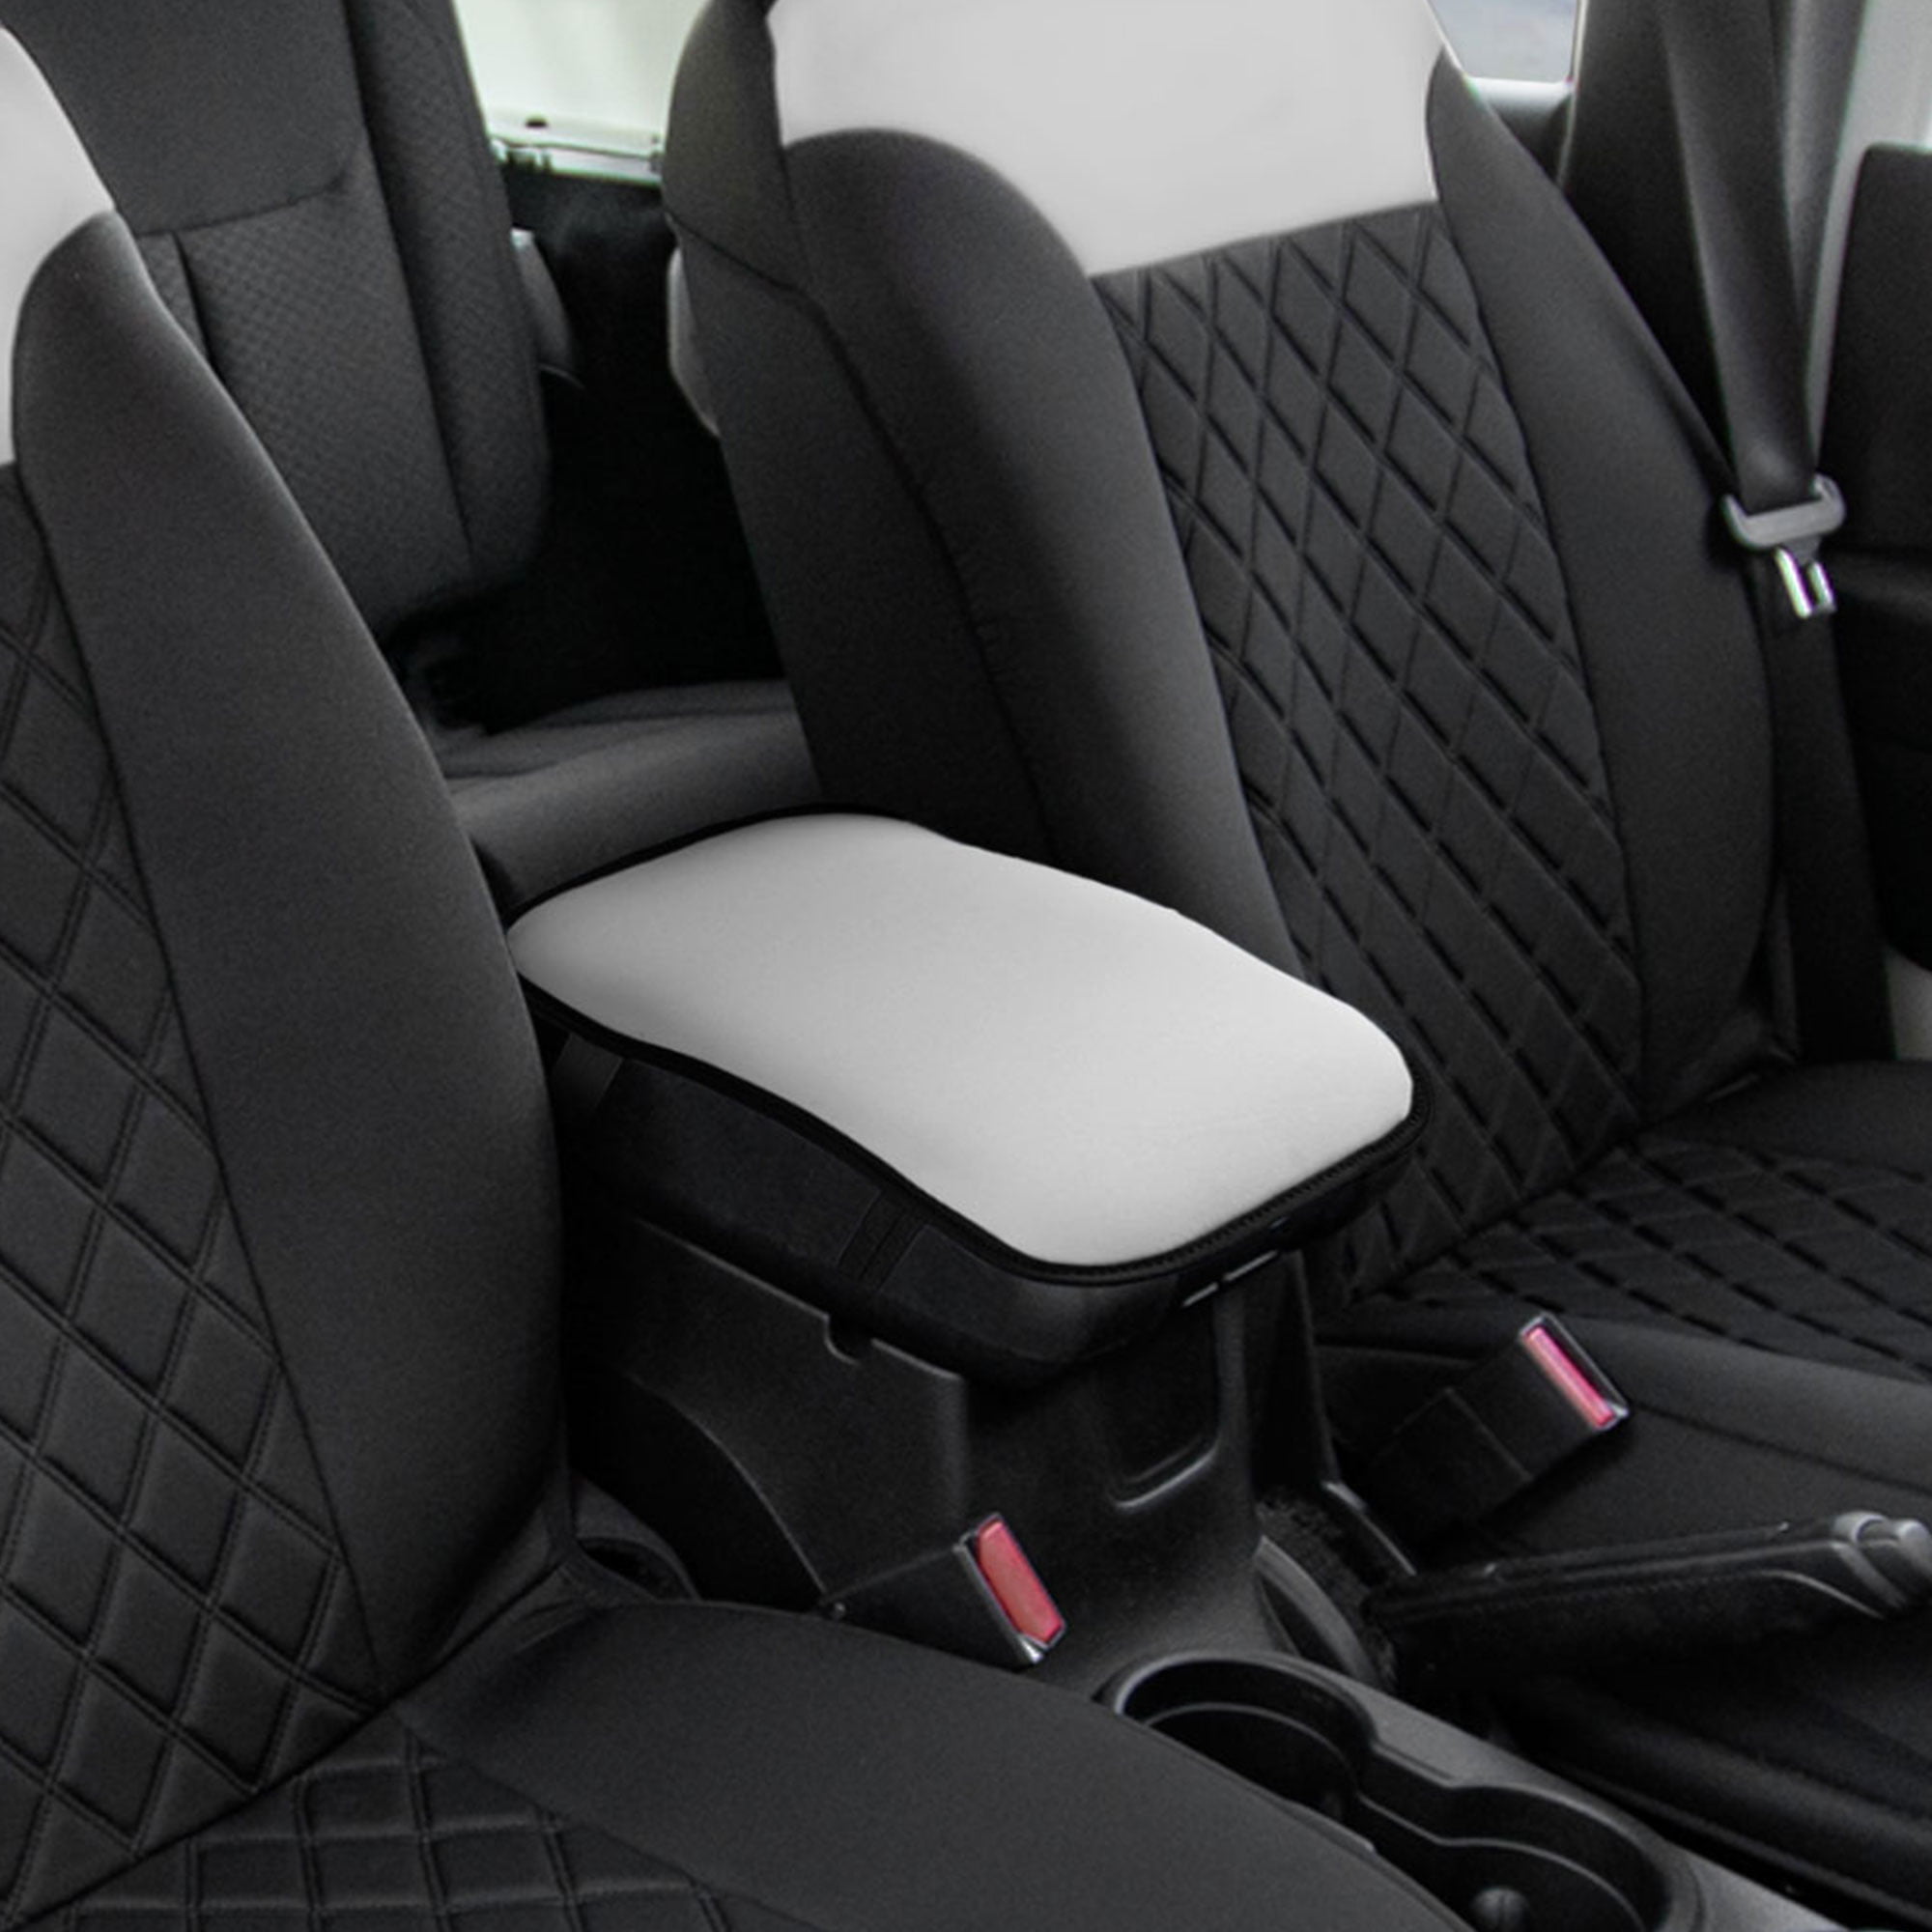 Center Accessories Soft, Car Group Van Water-Resistant Cover Car for Universal Design, Neoprene Box Ergonomic Durable FH & Armrest Seat Truck, Cushion Fit, Console SUV,